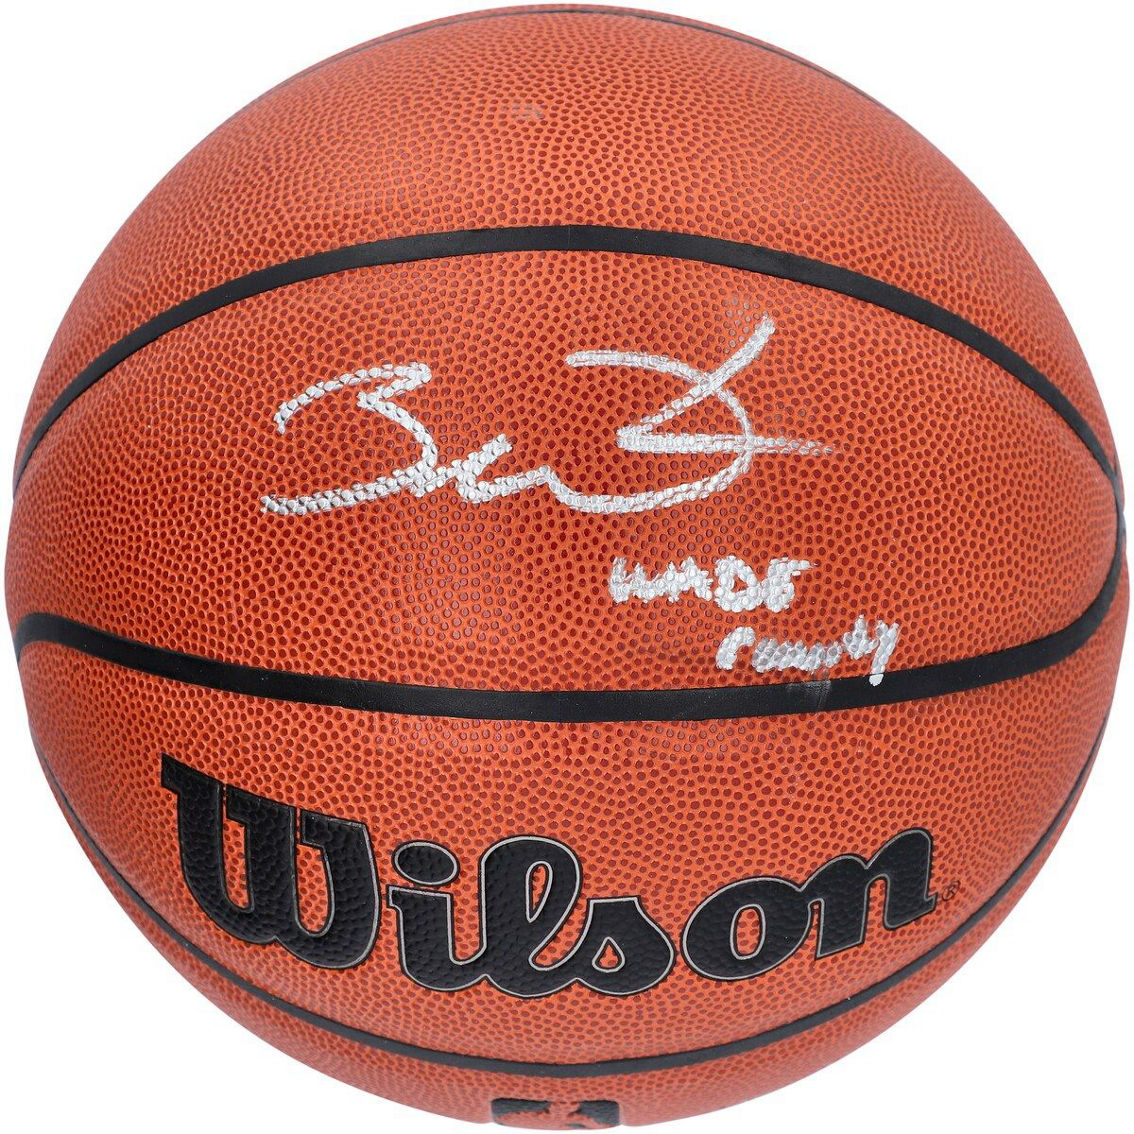 Fanatics Authentic Dwyane Wade Miami Heat Autographed Wilson Authentic Series Indoor/Outdoor Basketball with ''WADE COUNTY'' Inscription - Image 2 of 3